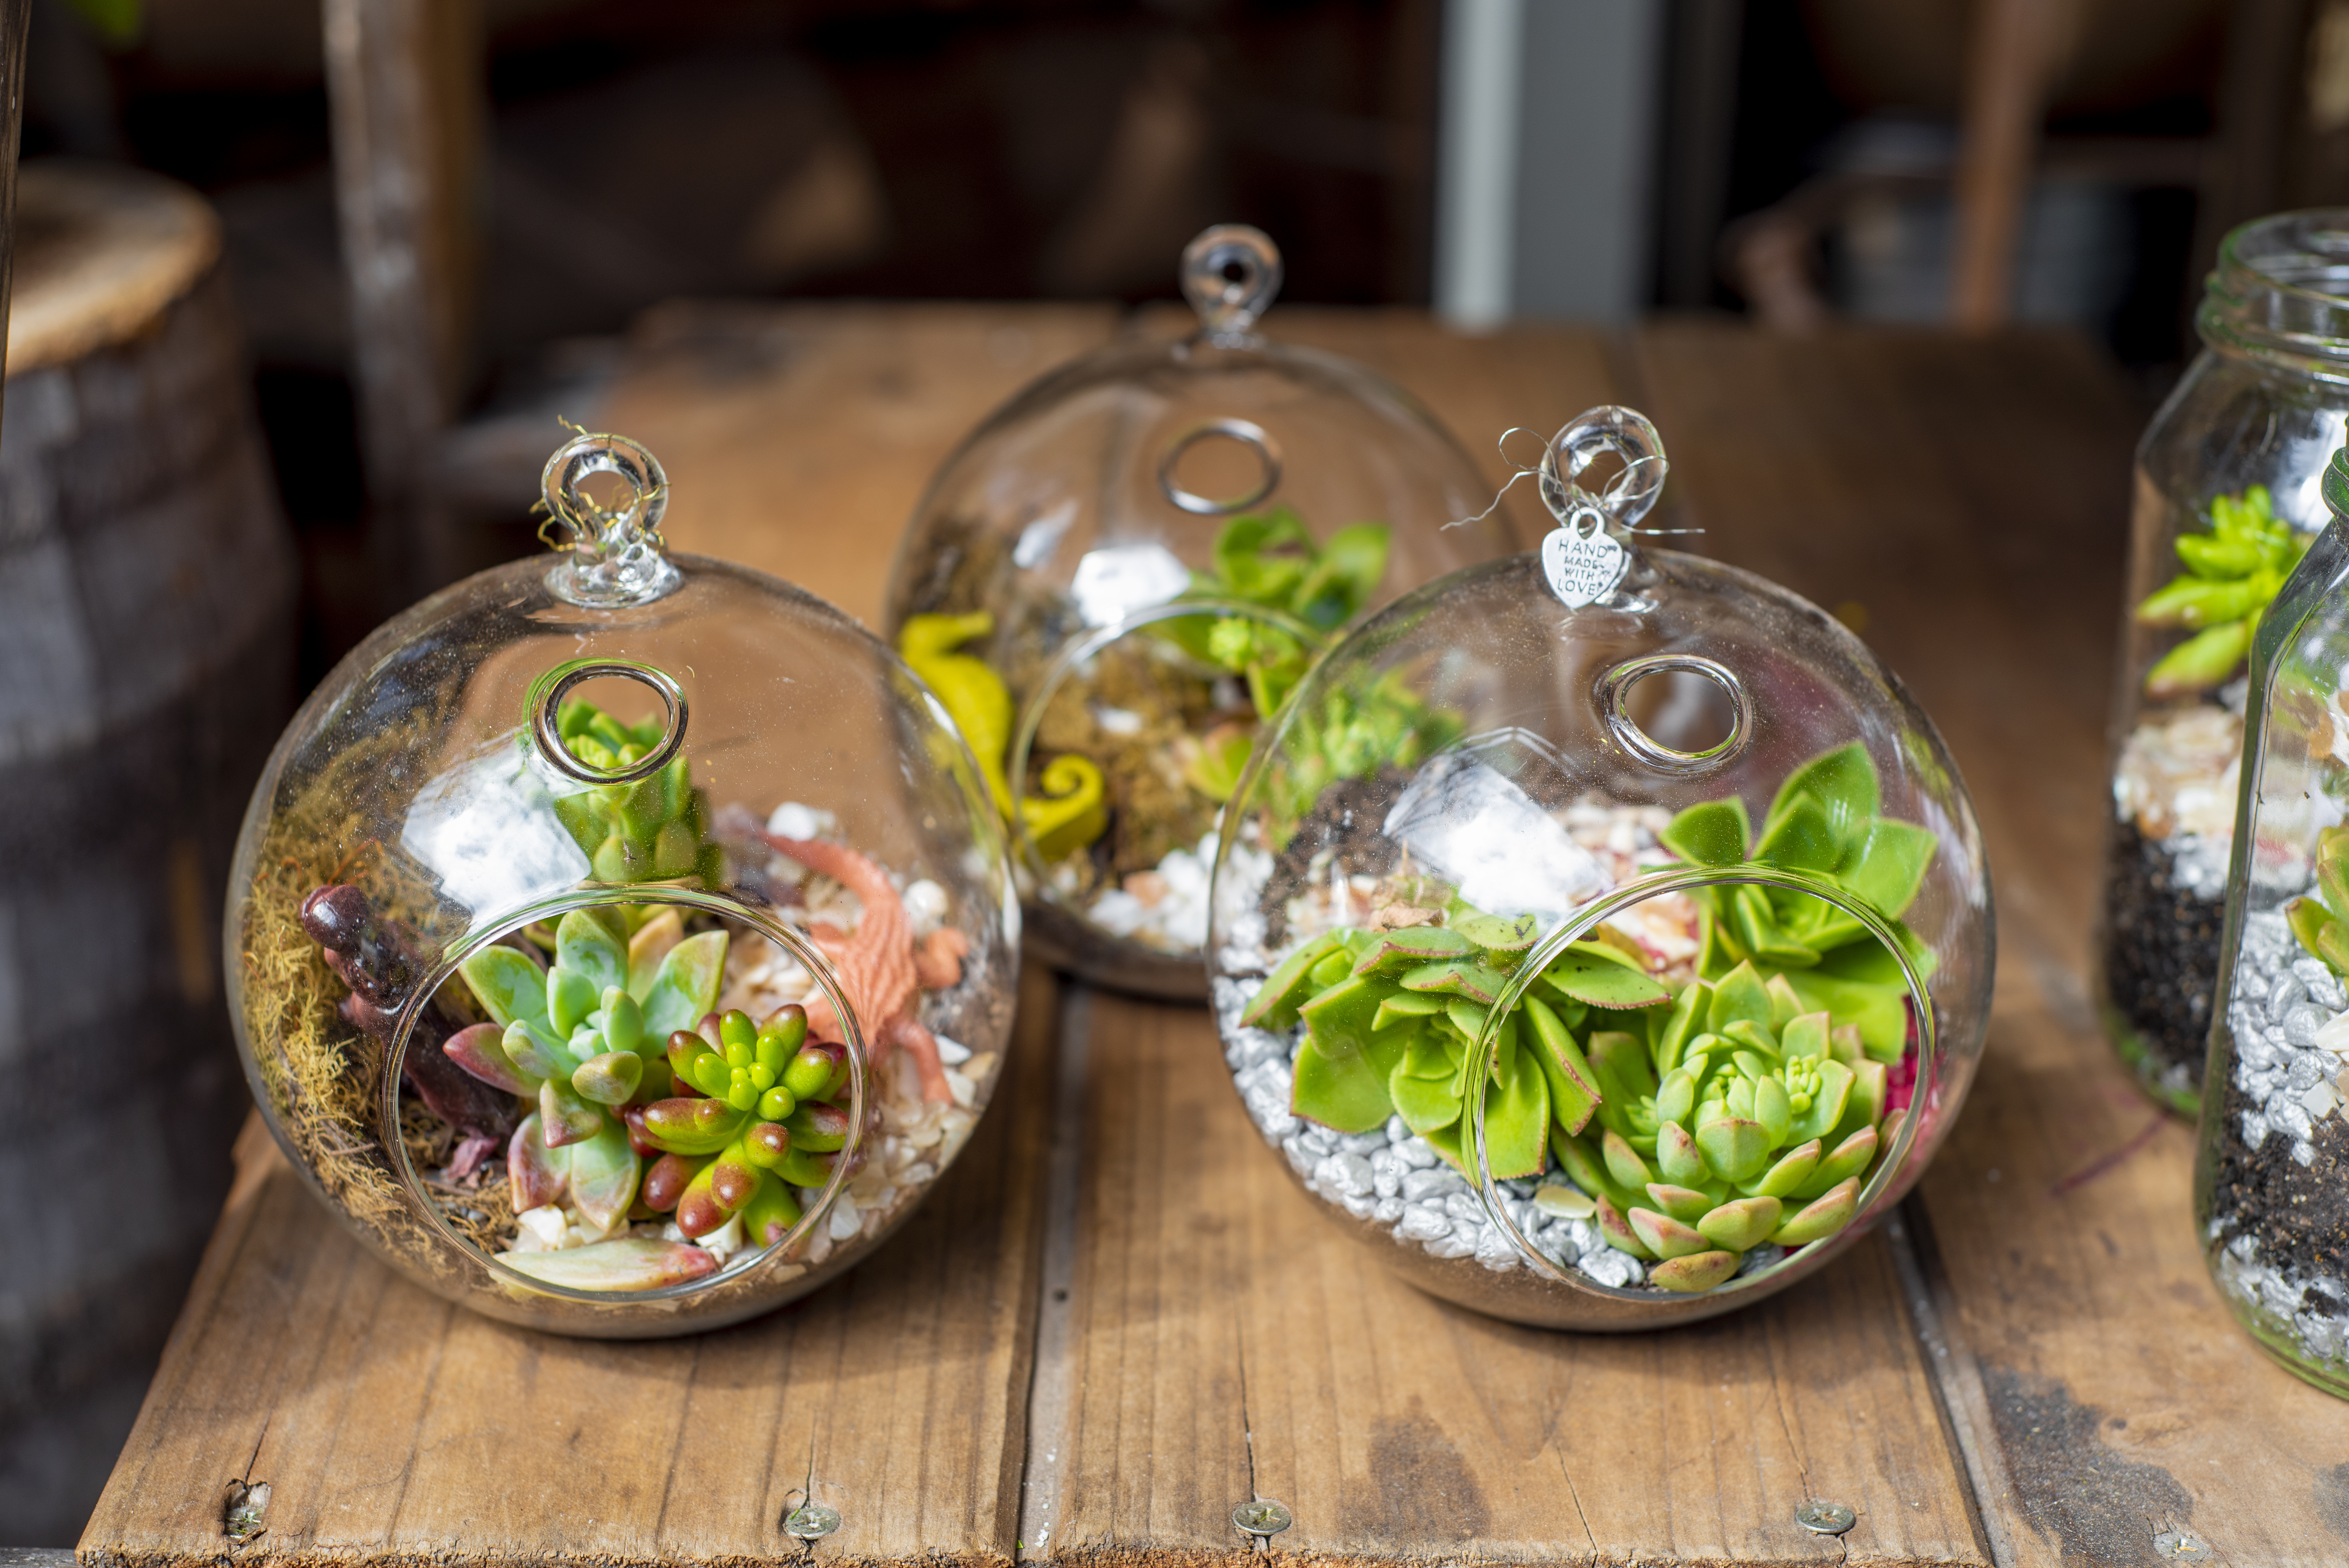 Wooden table with three mini terrariums filled with plants and creatures.